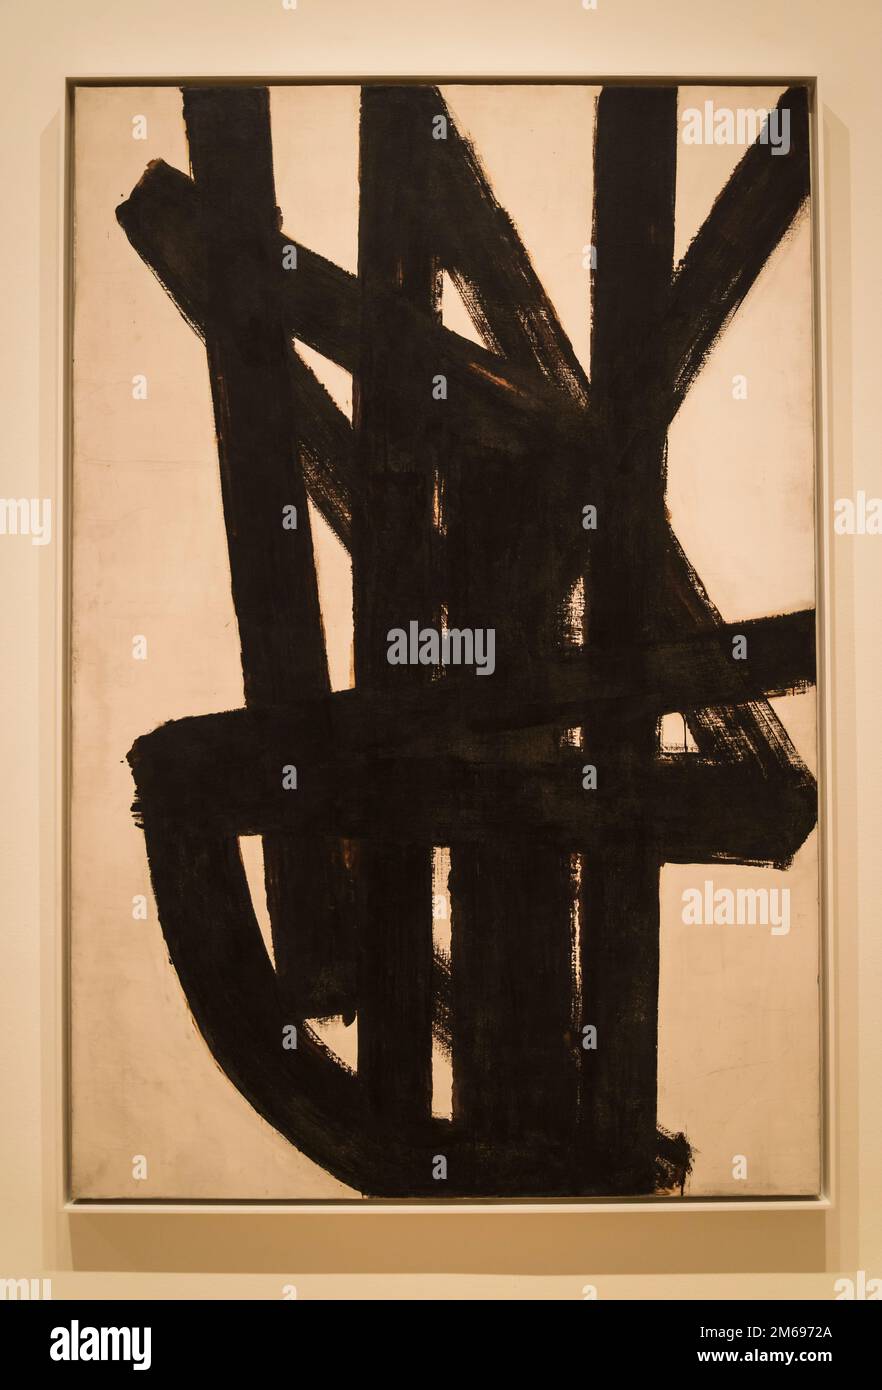 Pierre Soulages: Painting, 1949, MOMA, The Museum of Modern Art, New York City, USA Stock Photo